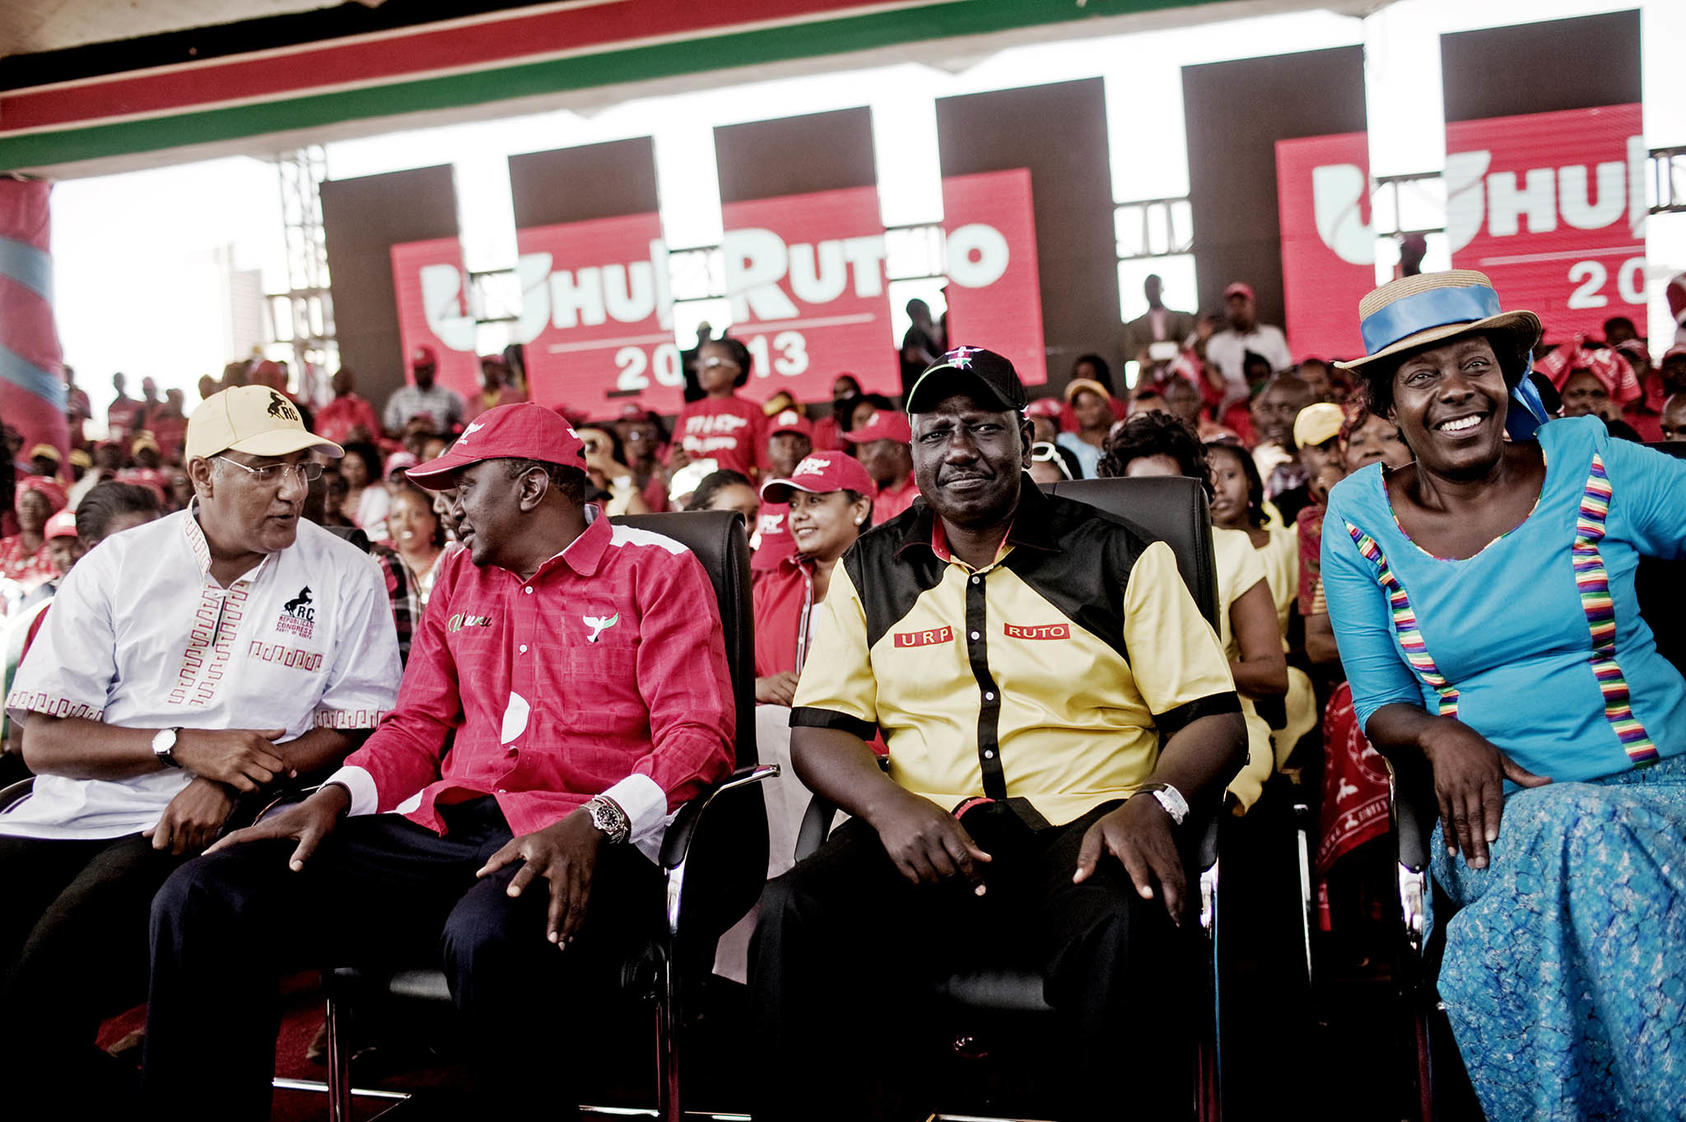 Kenya’s new president William Ruto (second from right) sits with former President Uhuru Kenyatta (second from left) at a campaign rally in 2013, when Ruto ran as Kenyatta’s deputy. (Pete Muller/The New York Times)